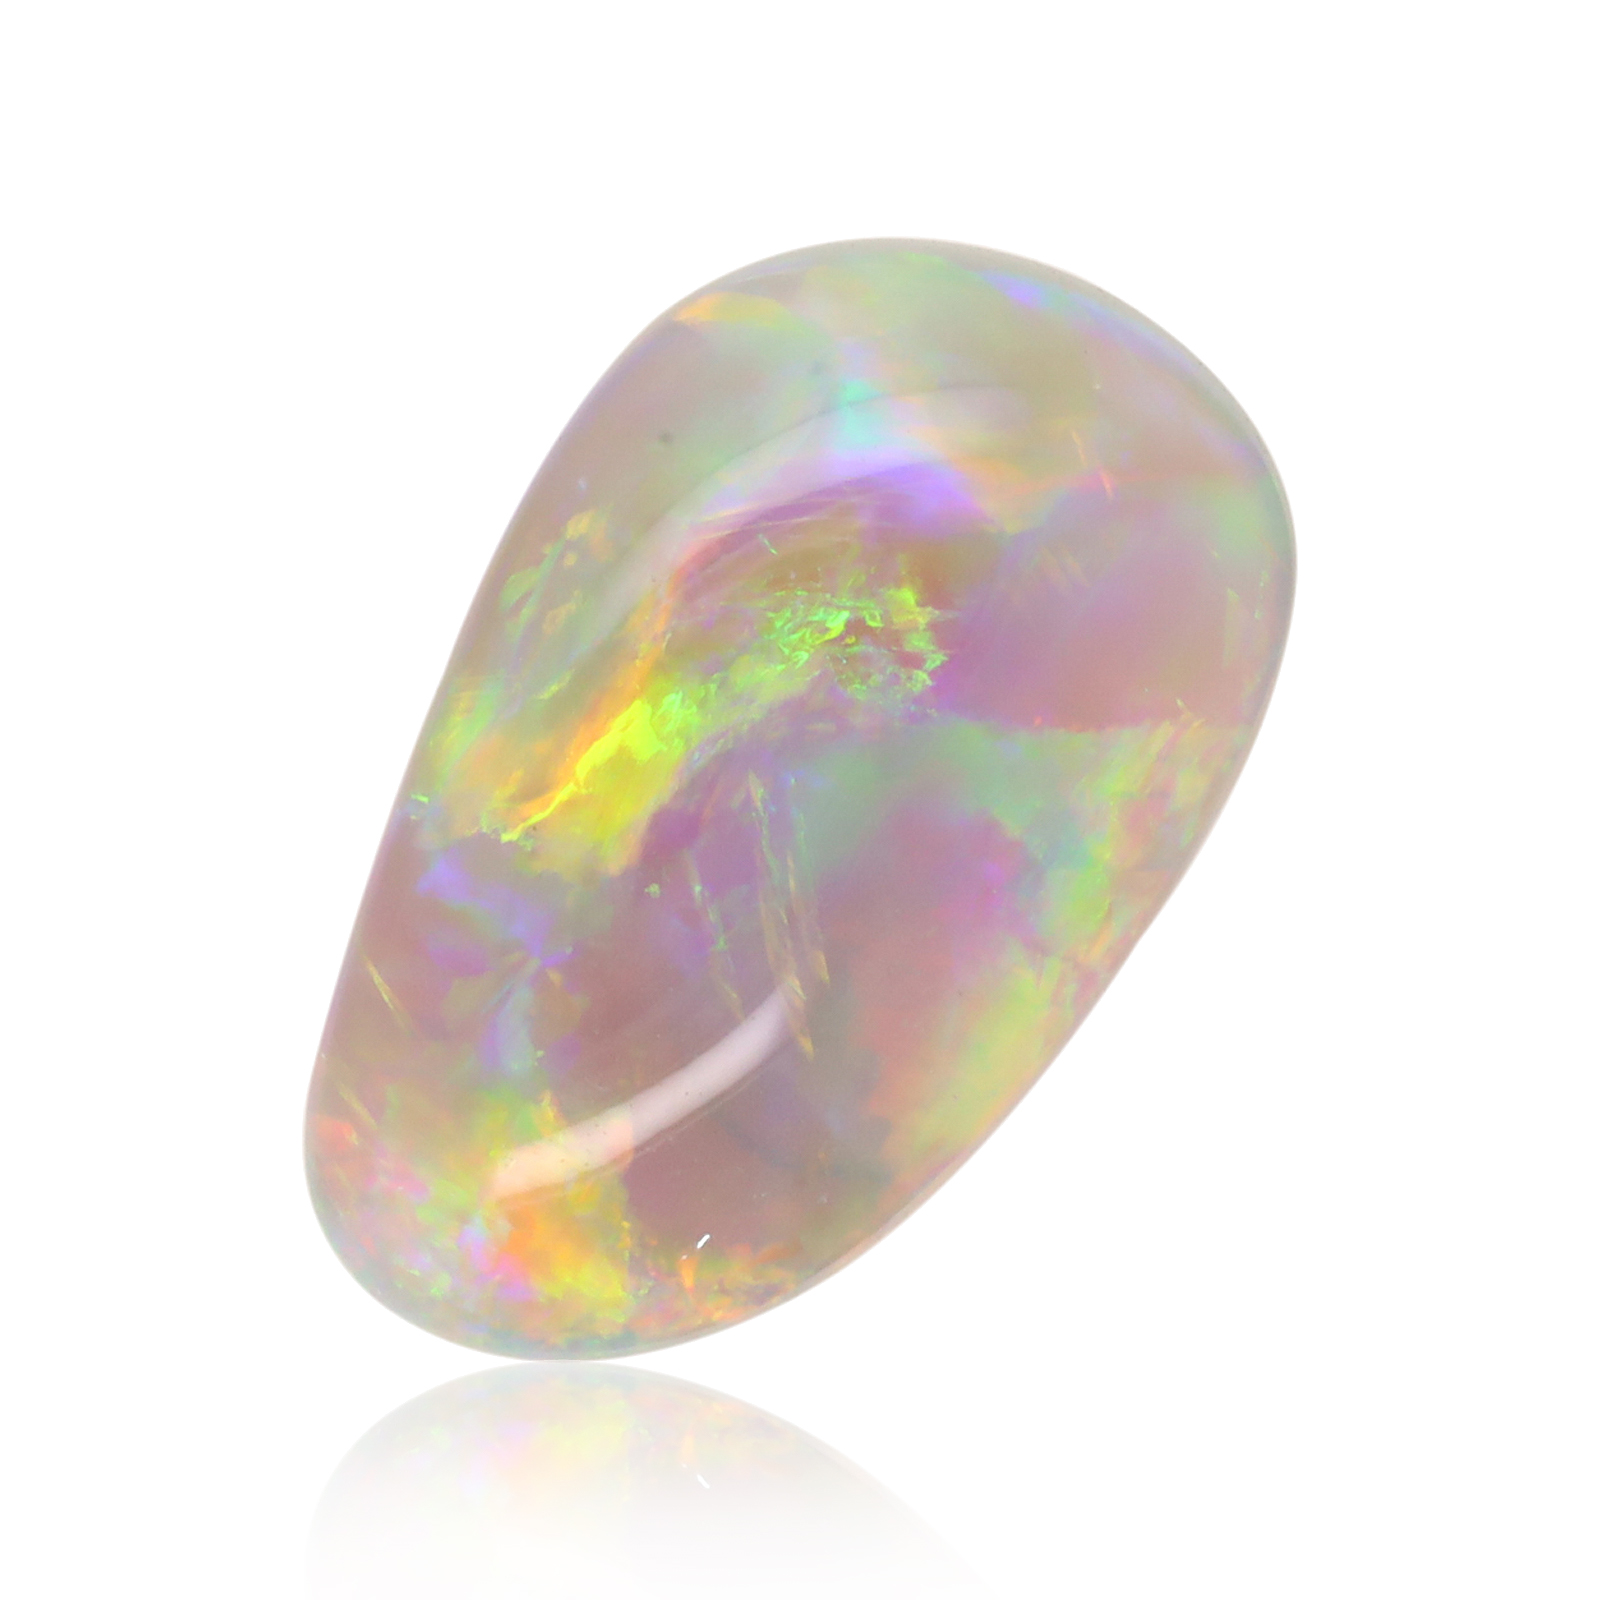 Green, Yellow and purple Solid Unset Crystal Opal